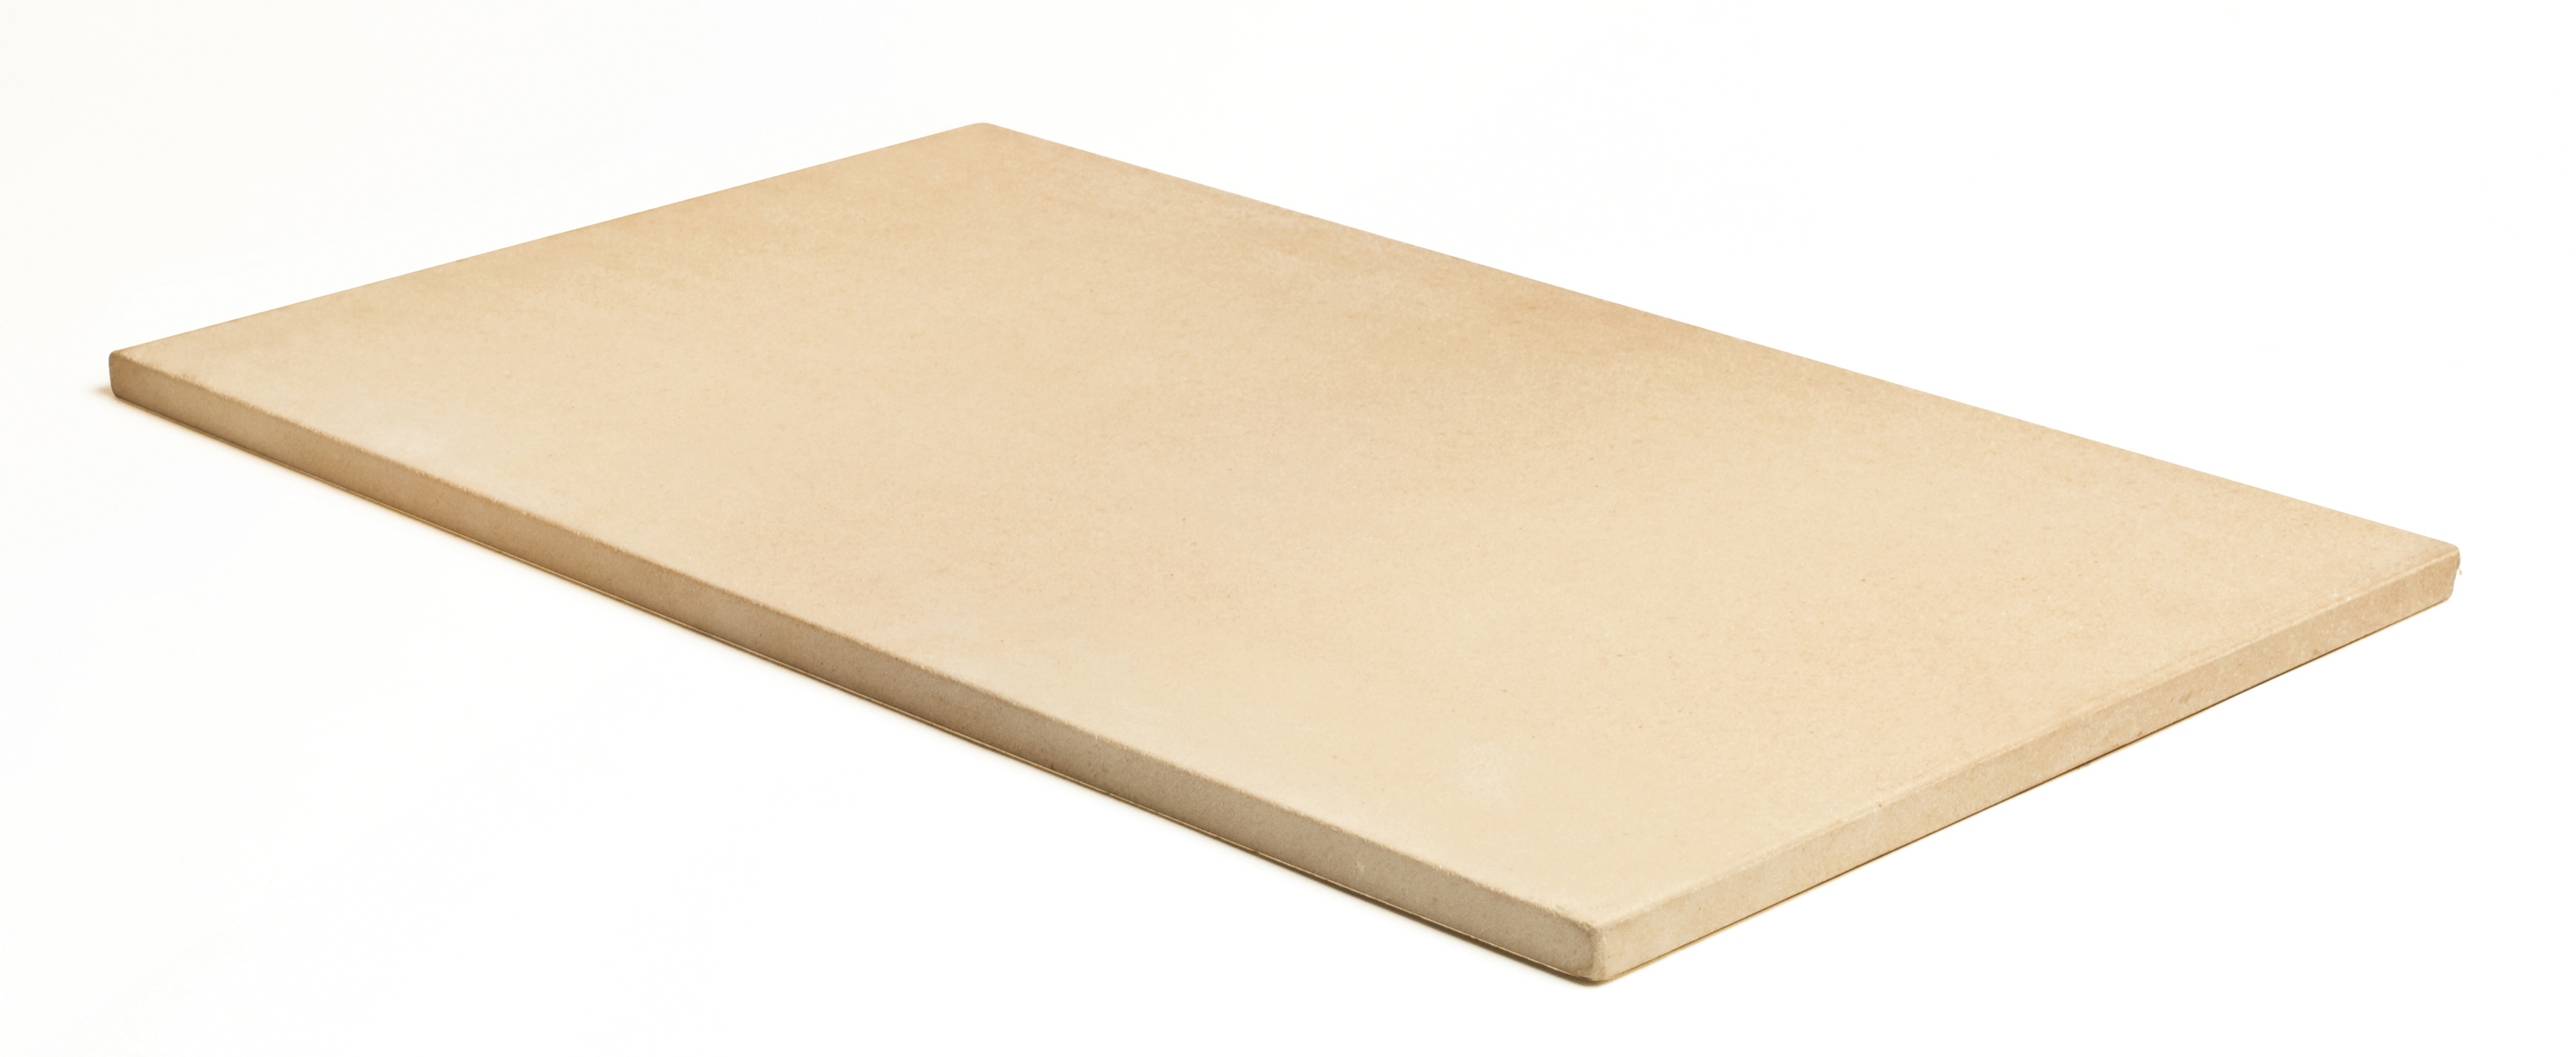 Pizzacraft Rectangular Cordierite Baking/Pizza Stone for Oven or Grill, 20"x13.5" - PC0102 - image 5 of 5